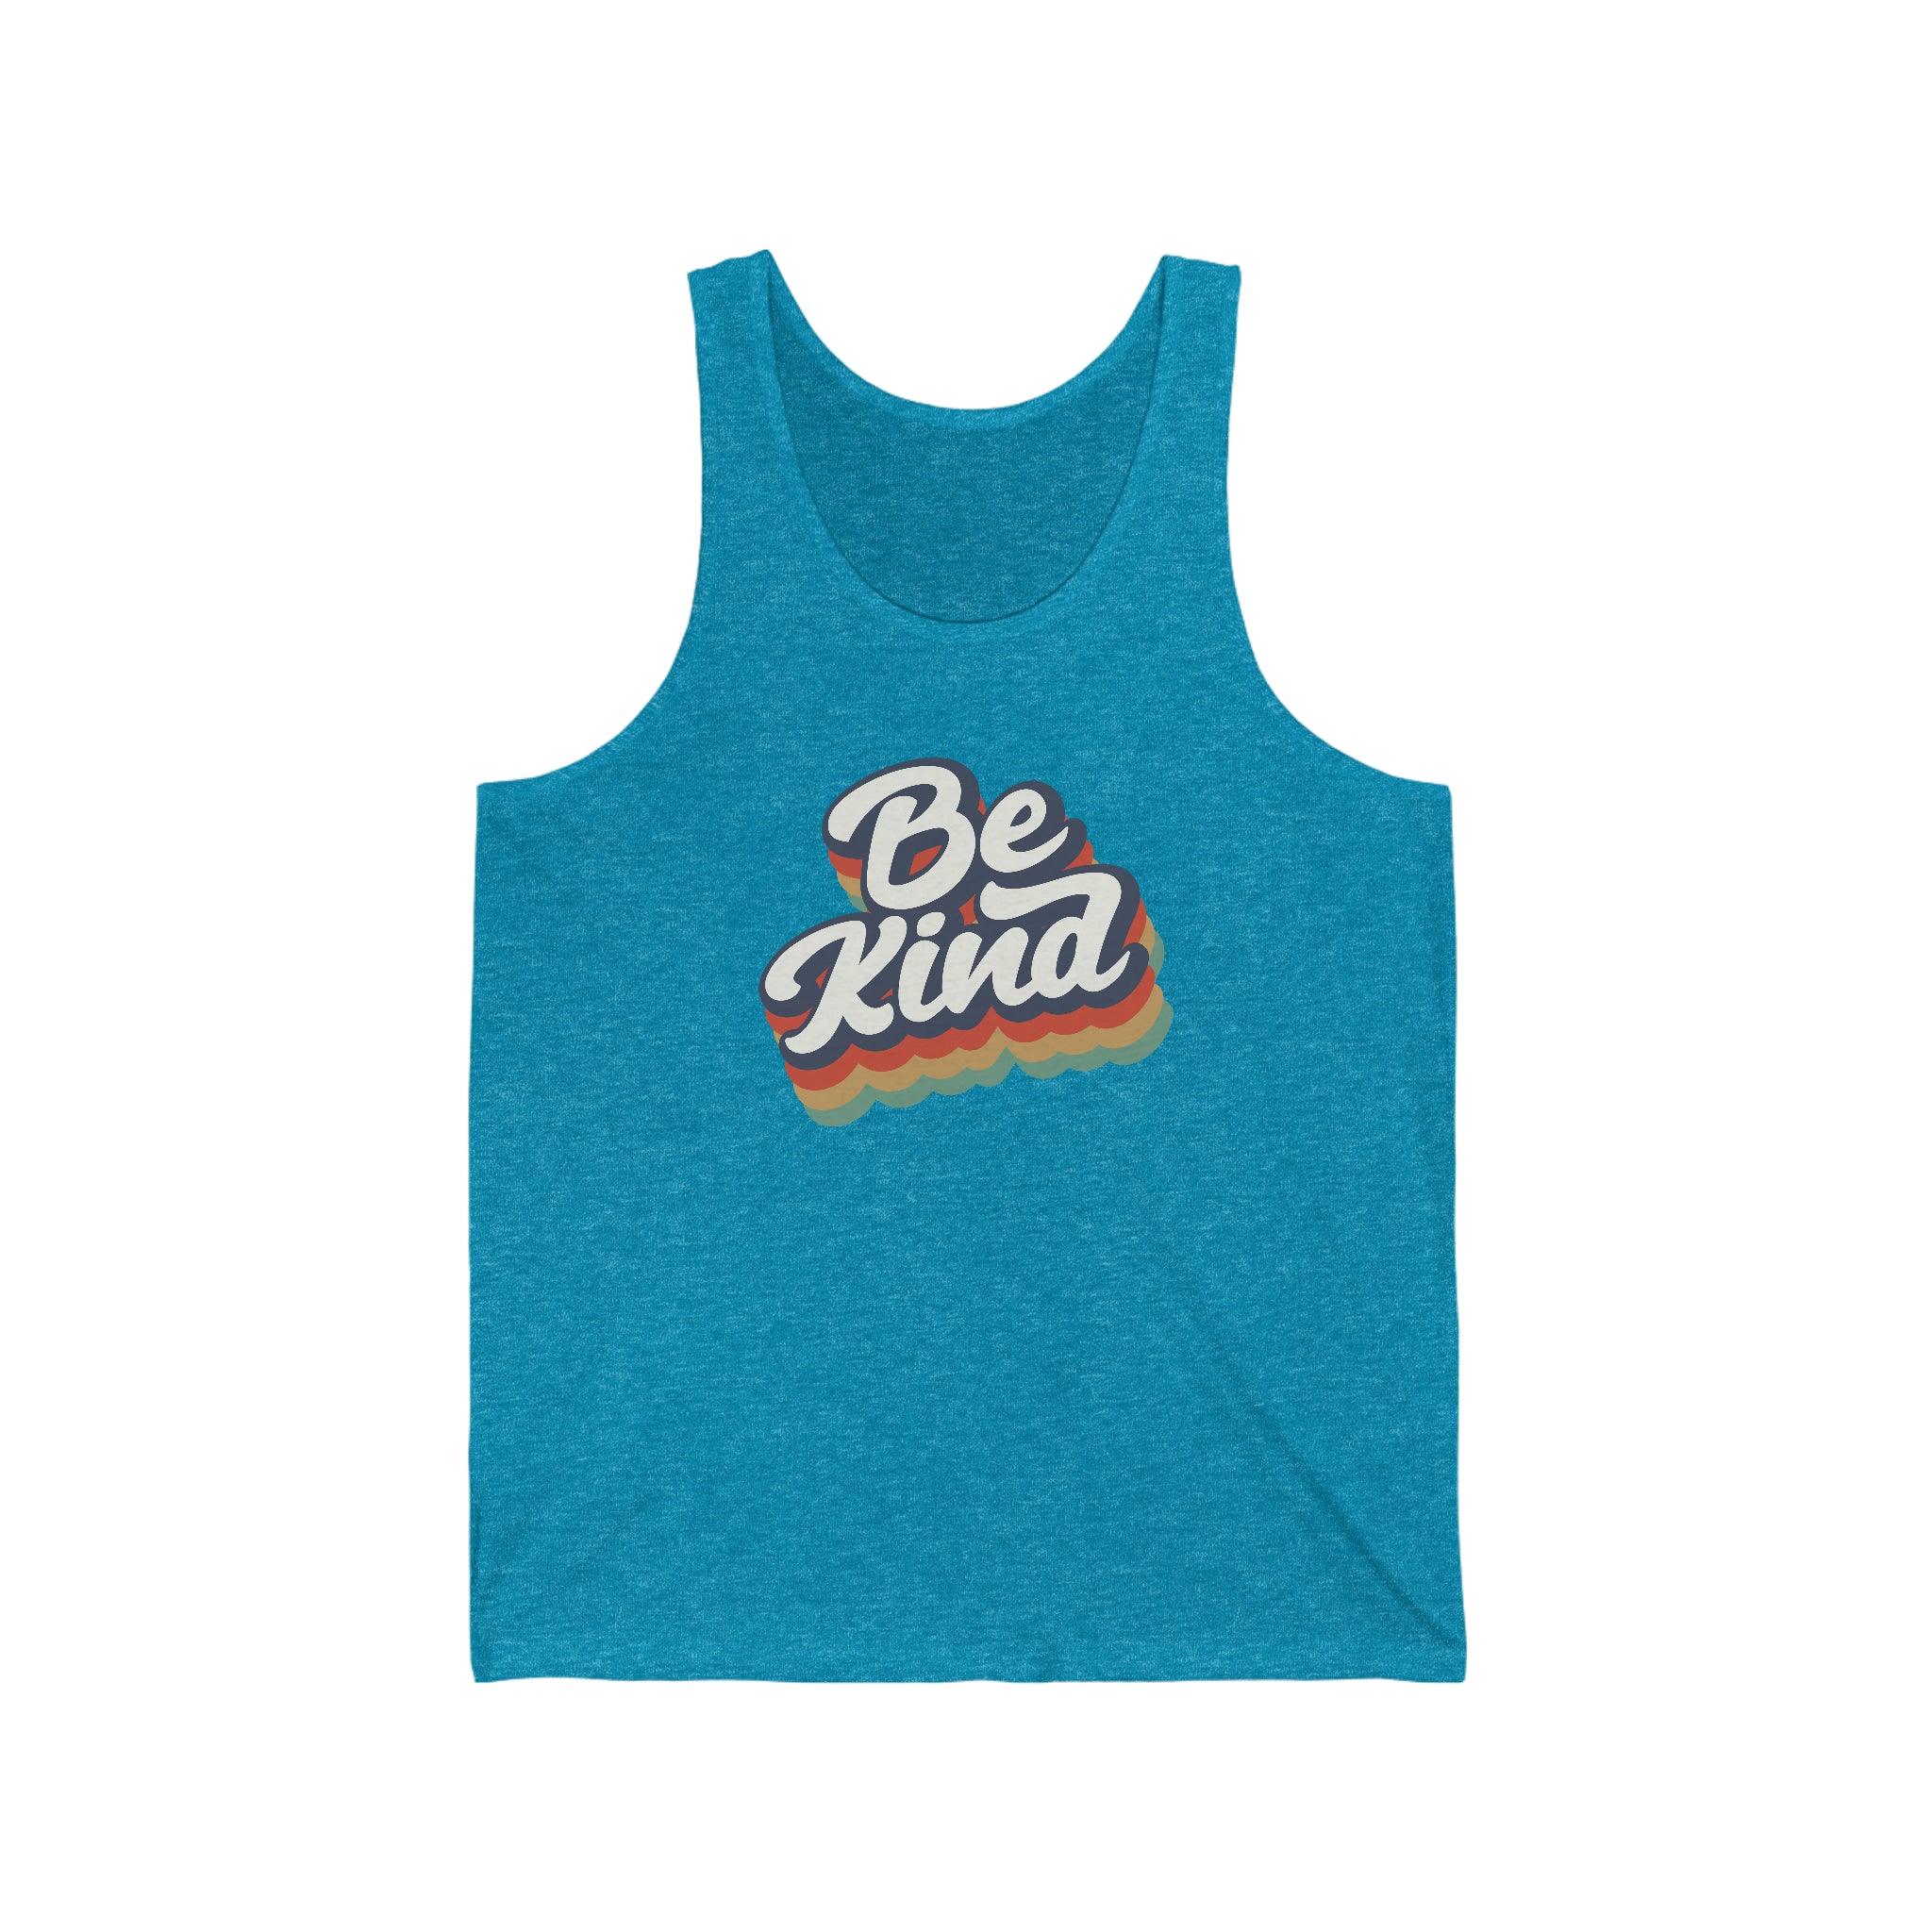 Be Kind - Kindness in the Front : 100% Cotton Tank Top by Bella+Canvas